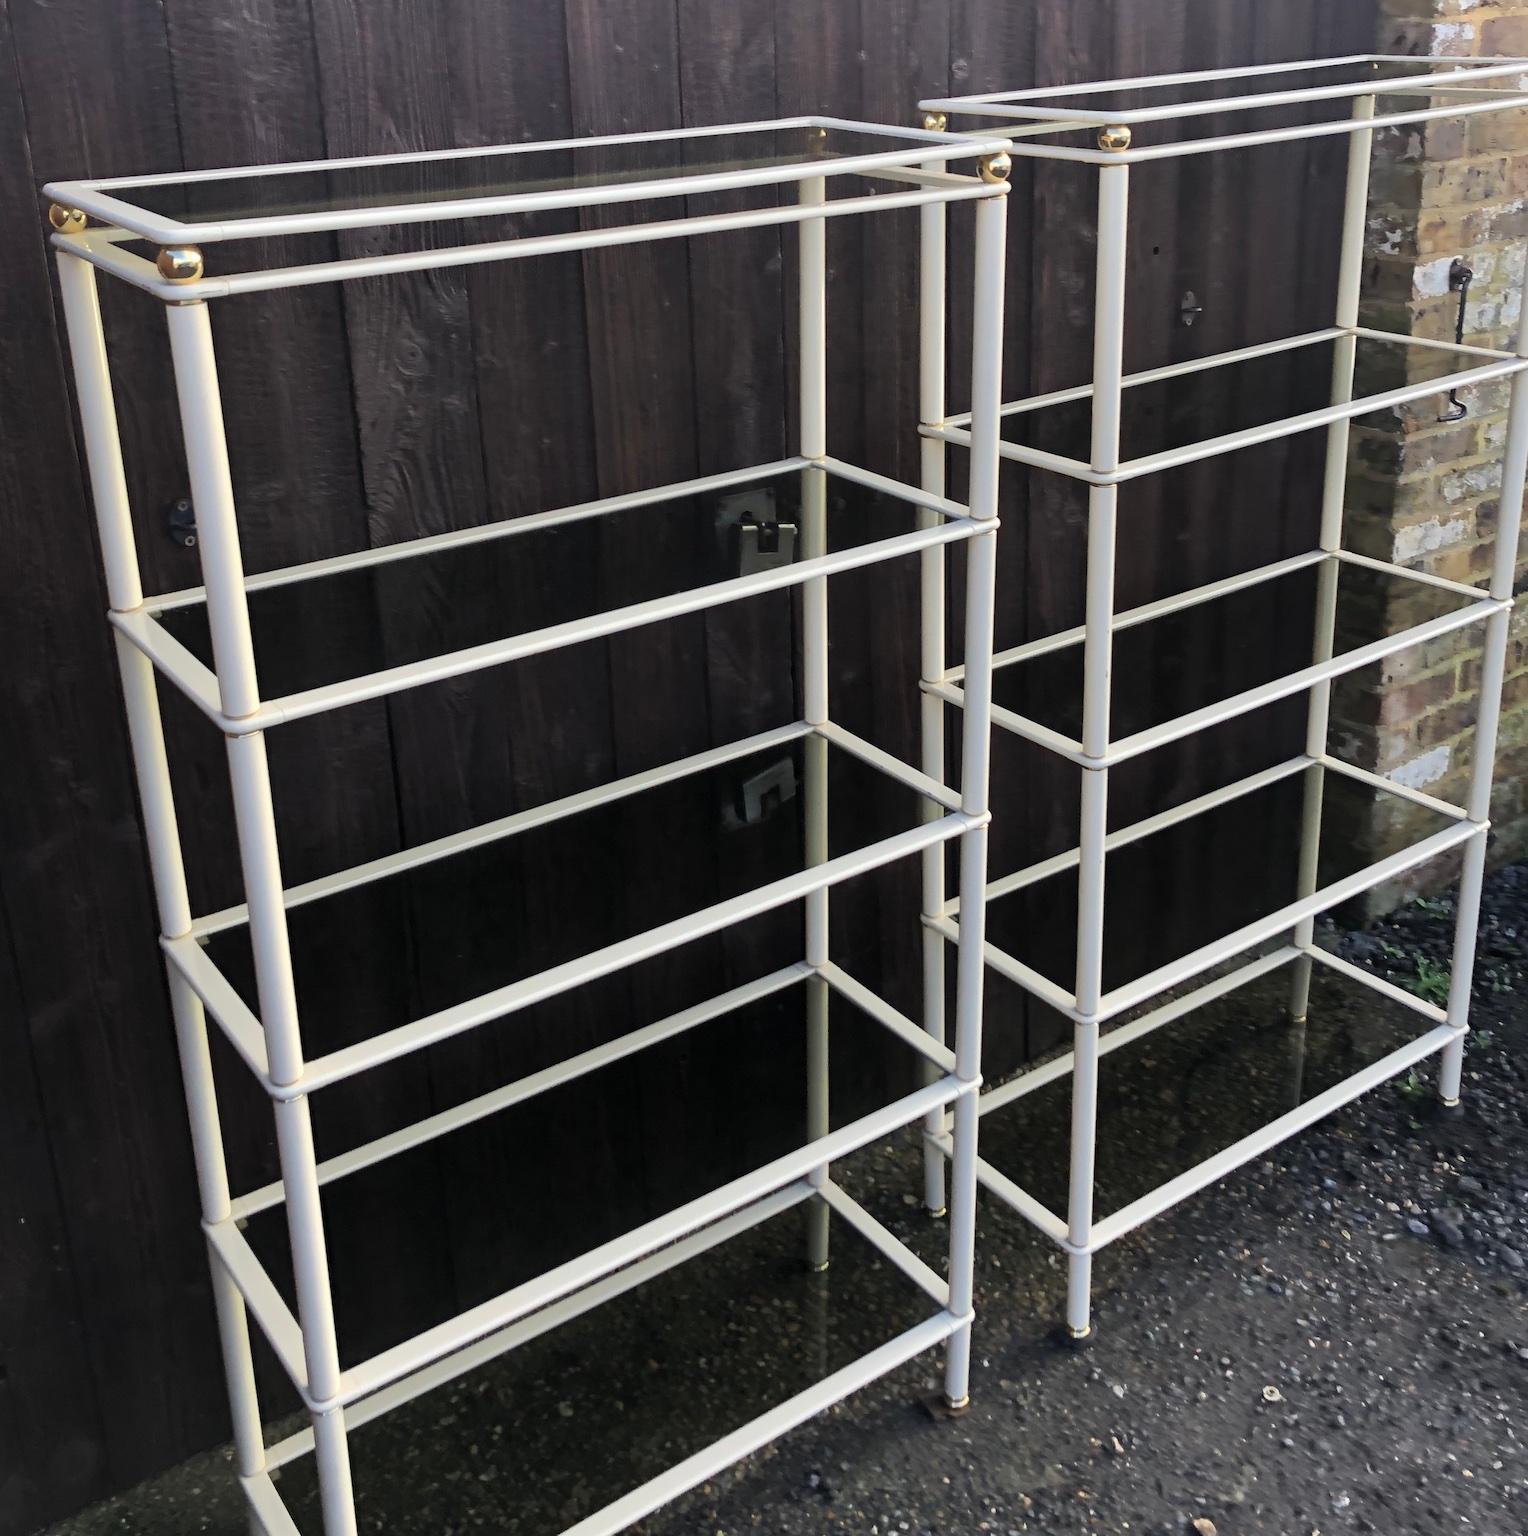 Midcentury Cream and Gold Metal Shelving Units, Italian, 1980s For Sale 7